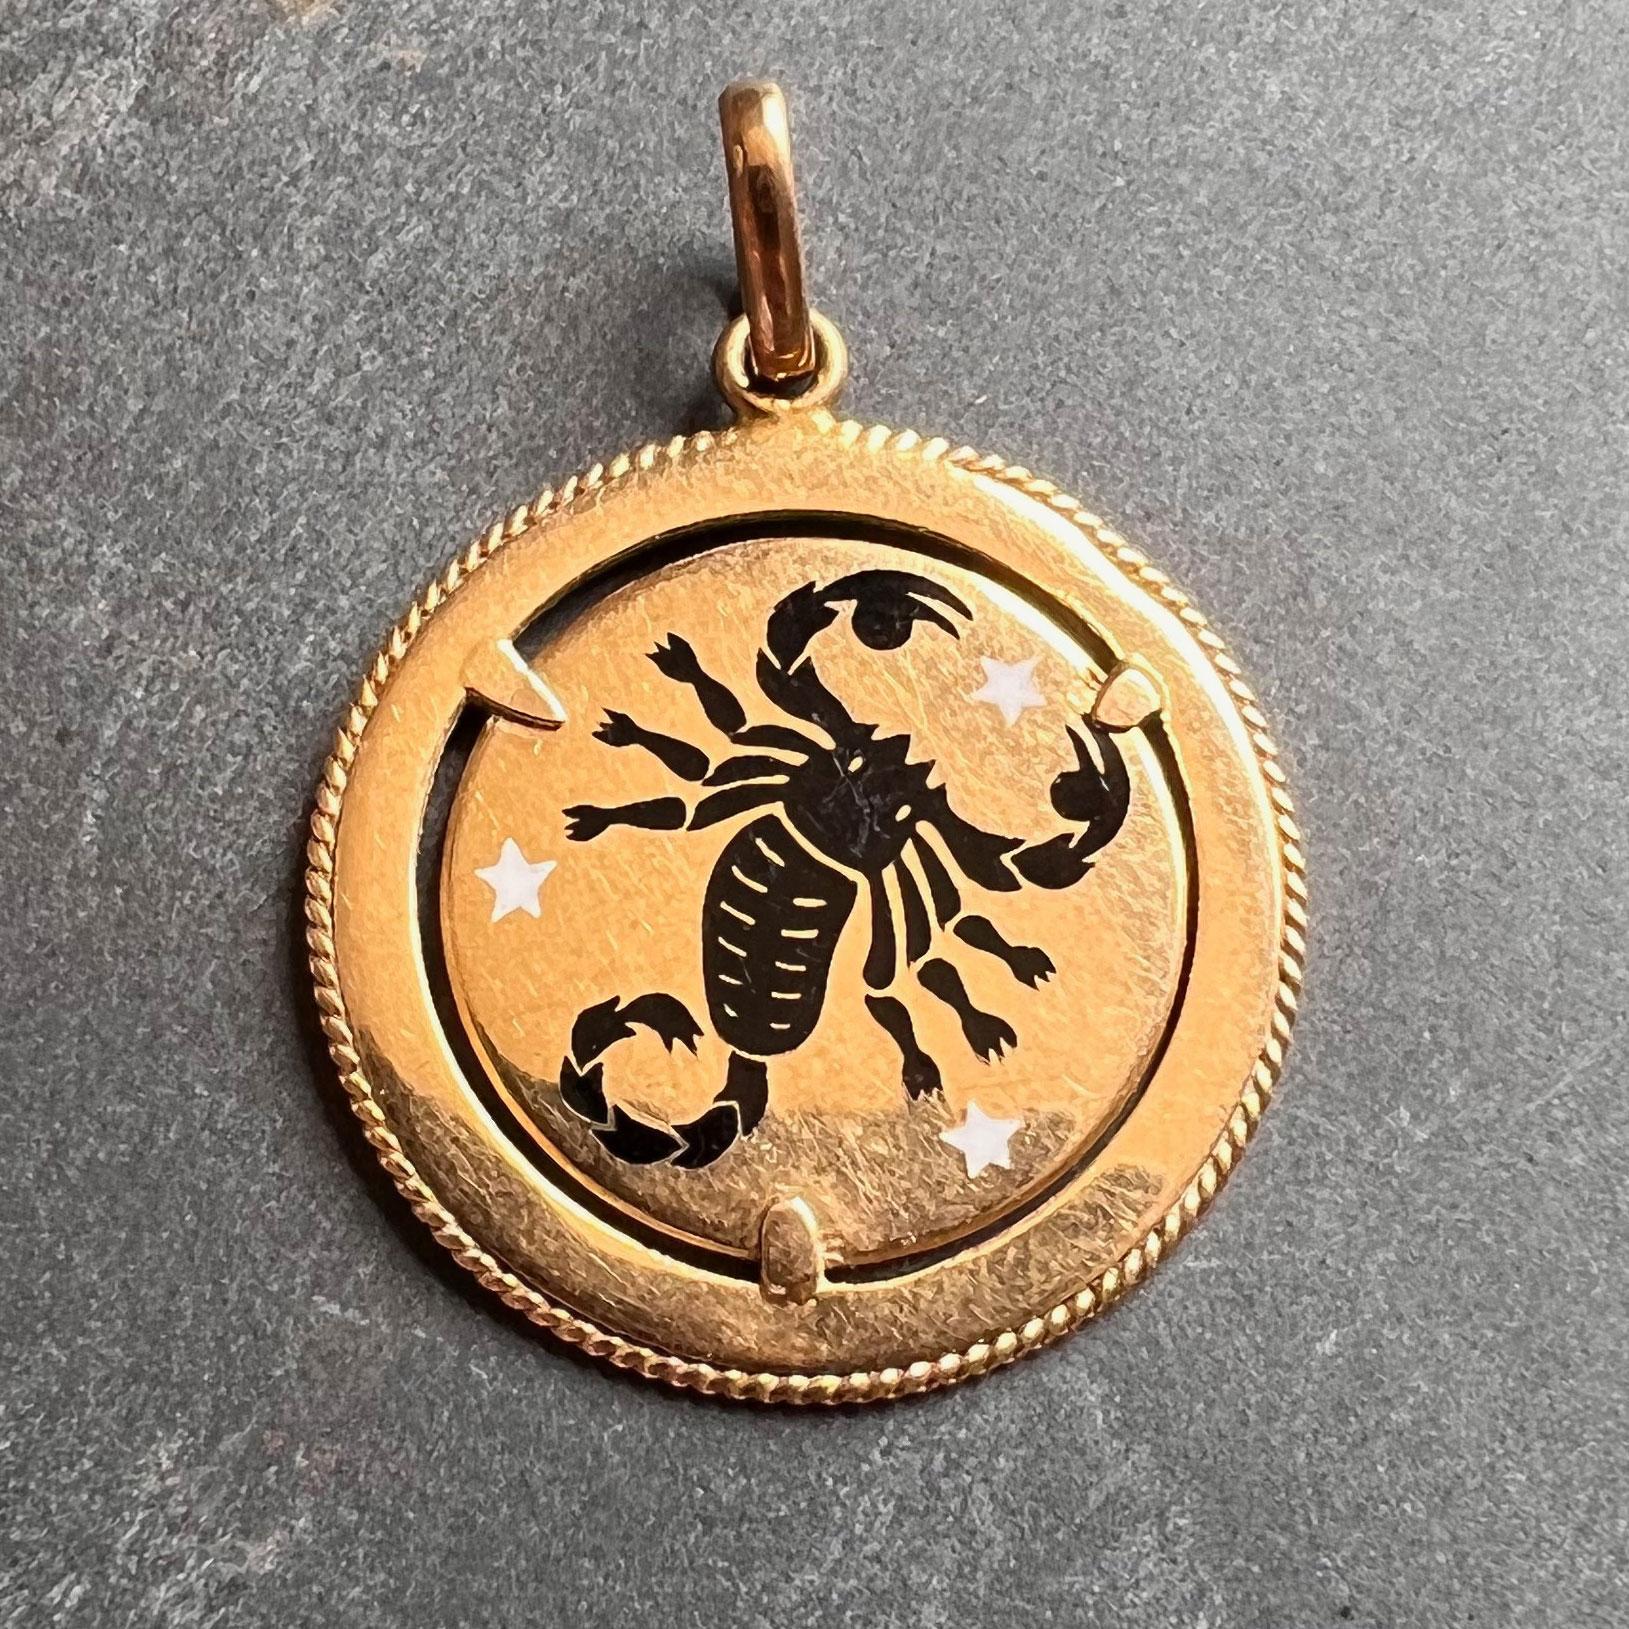 An 18 karat (18K) yellow gold charm pendant designed as a circular disc with an enamel depiction of a scorpion representing the zodiac starsign of Scorpio in a field of three white enamel stars. Stamped with Italian marks and 750 for 18 karat